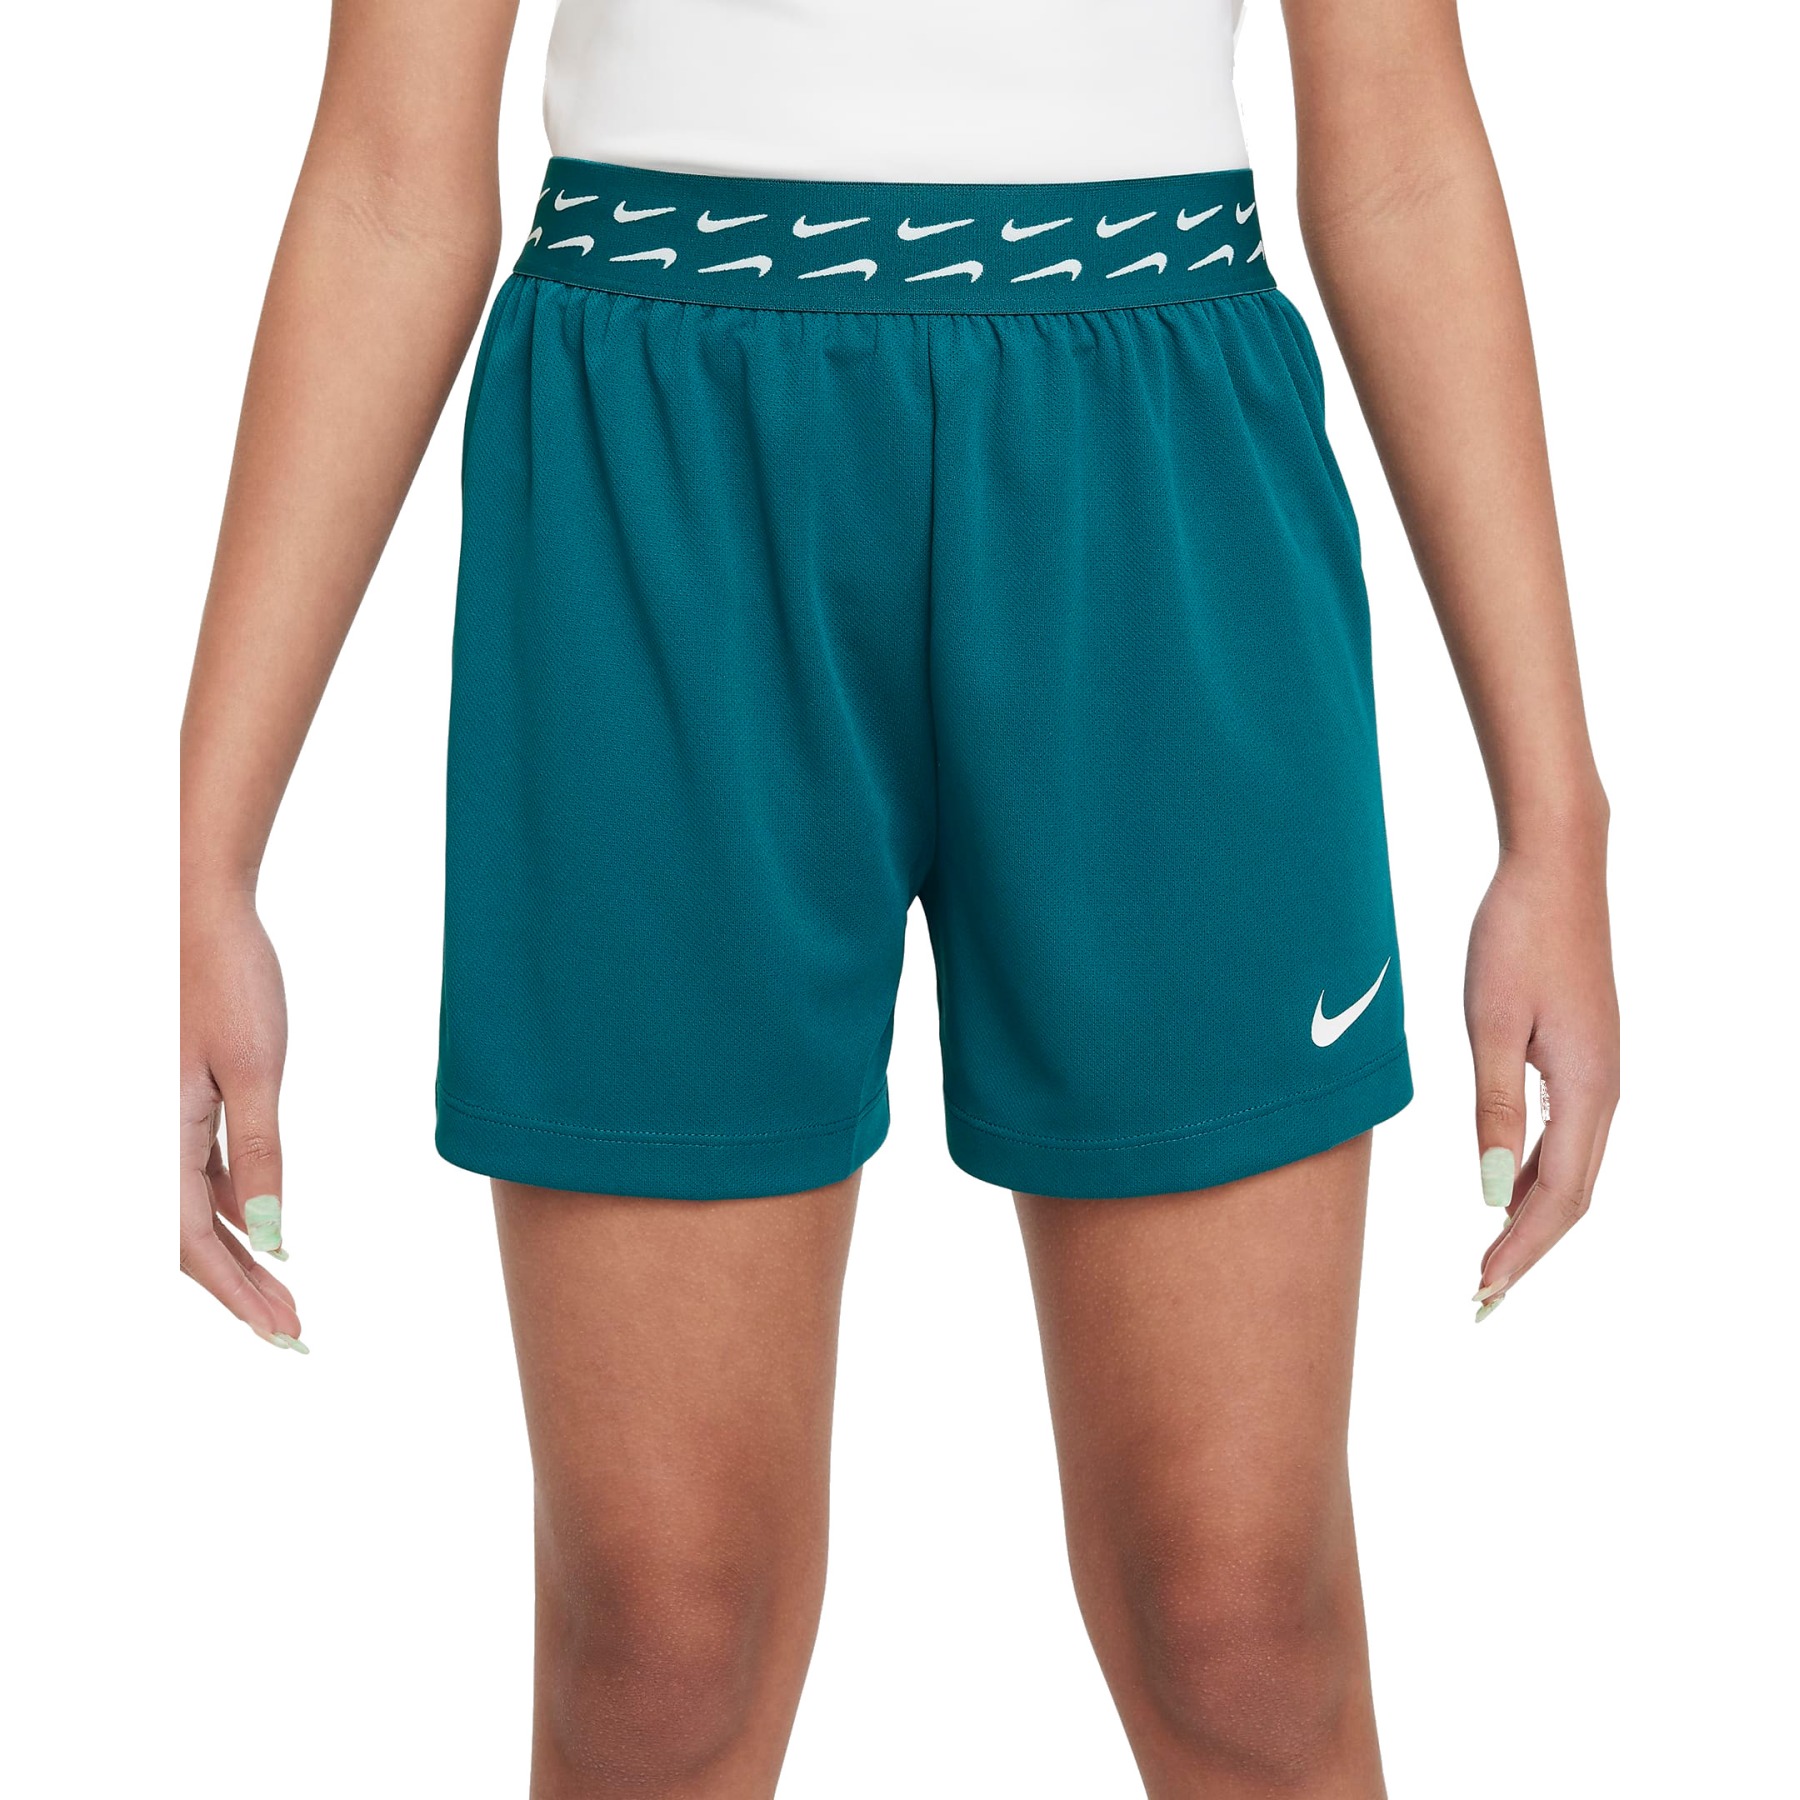 Picture of Nike Dri-FIT Trophy Training Shorts Kids - geode teal/white FB1092-381